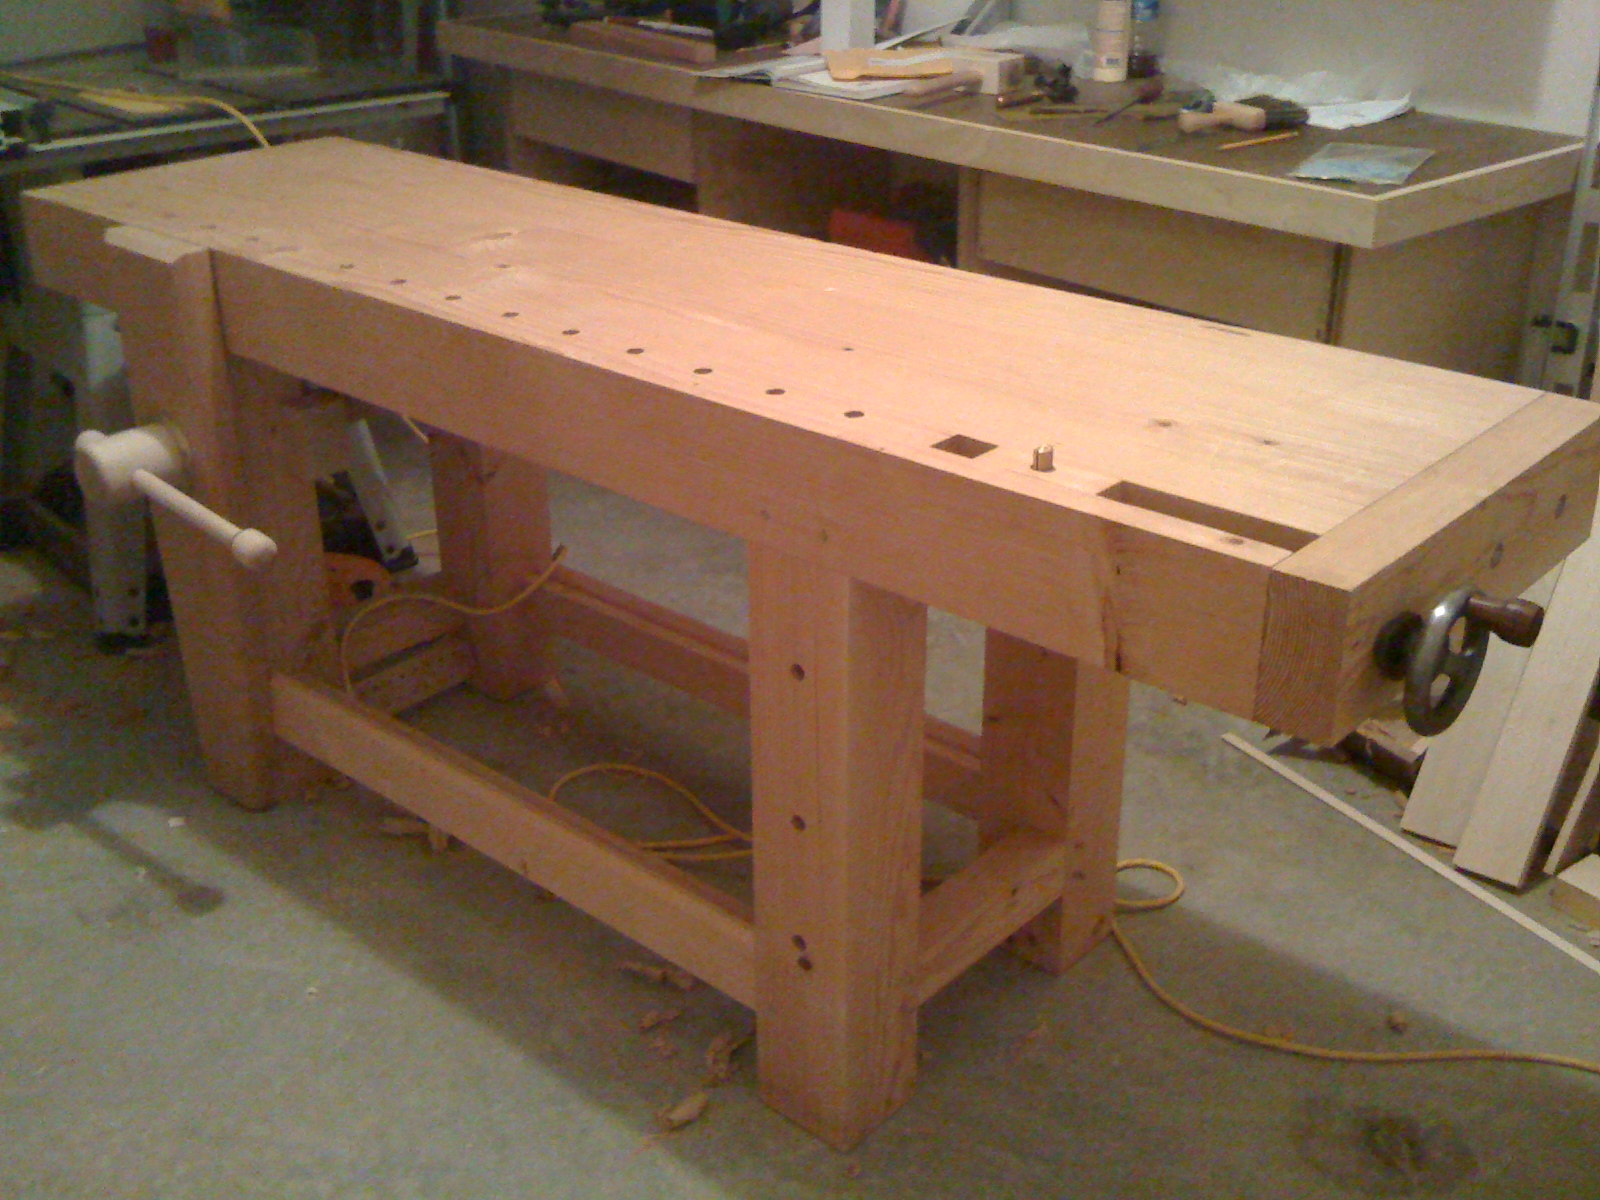 Sjoberg woodworking bench Plans DIY How to Make ...